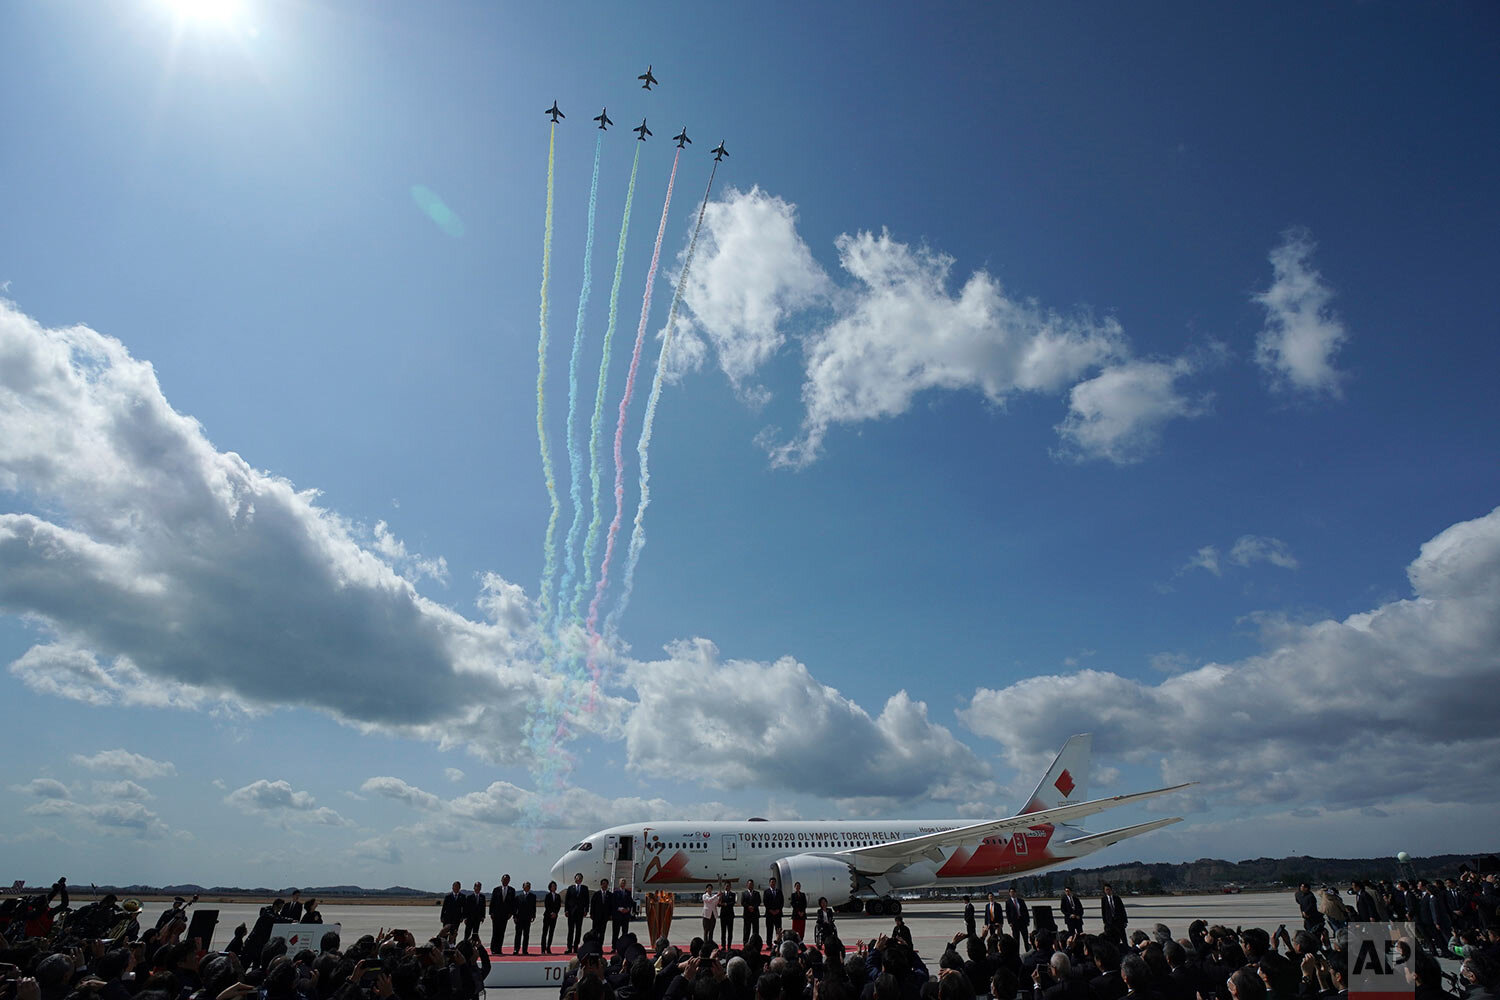  Blue Impulse of the Japan Air Self-Defense Force fly over during Olympic Flame Arrival Ceremony at Japan Air Self-Defense Force Matsushima Base in Higashimatsushima in Miyagi Prefecture, north of Tokyo, Friday, March 20, 2020. (AP Photo/Eugene Hoshi